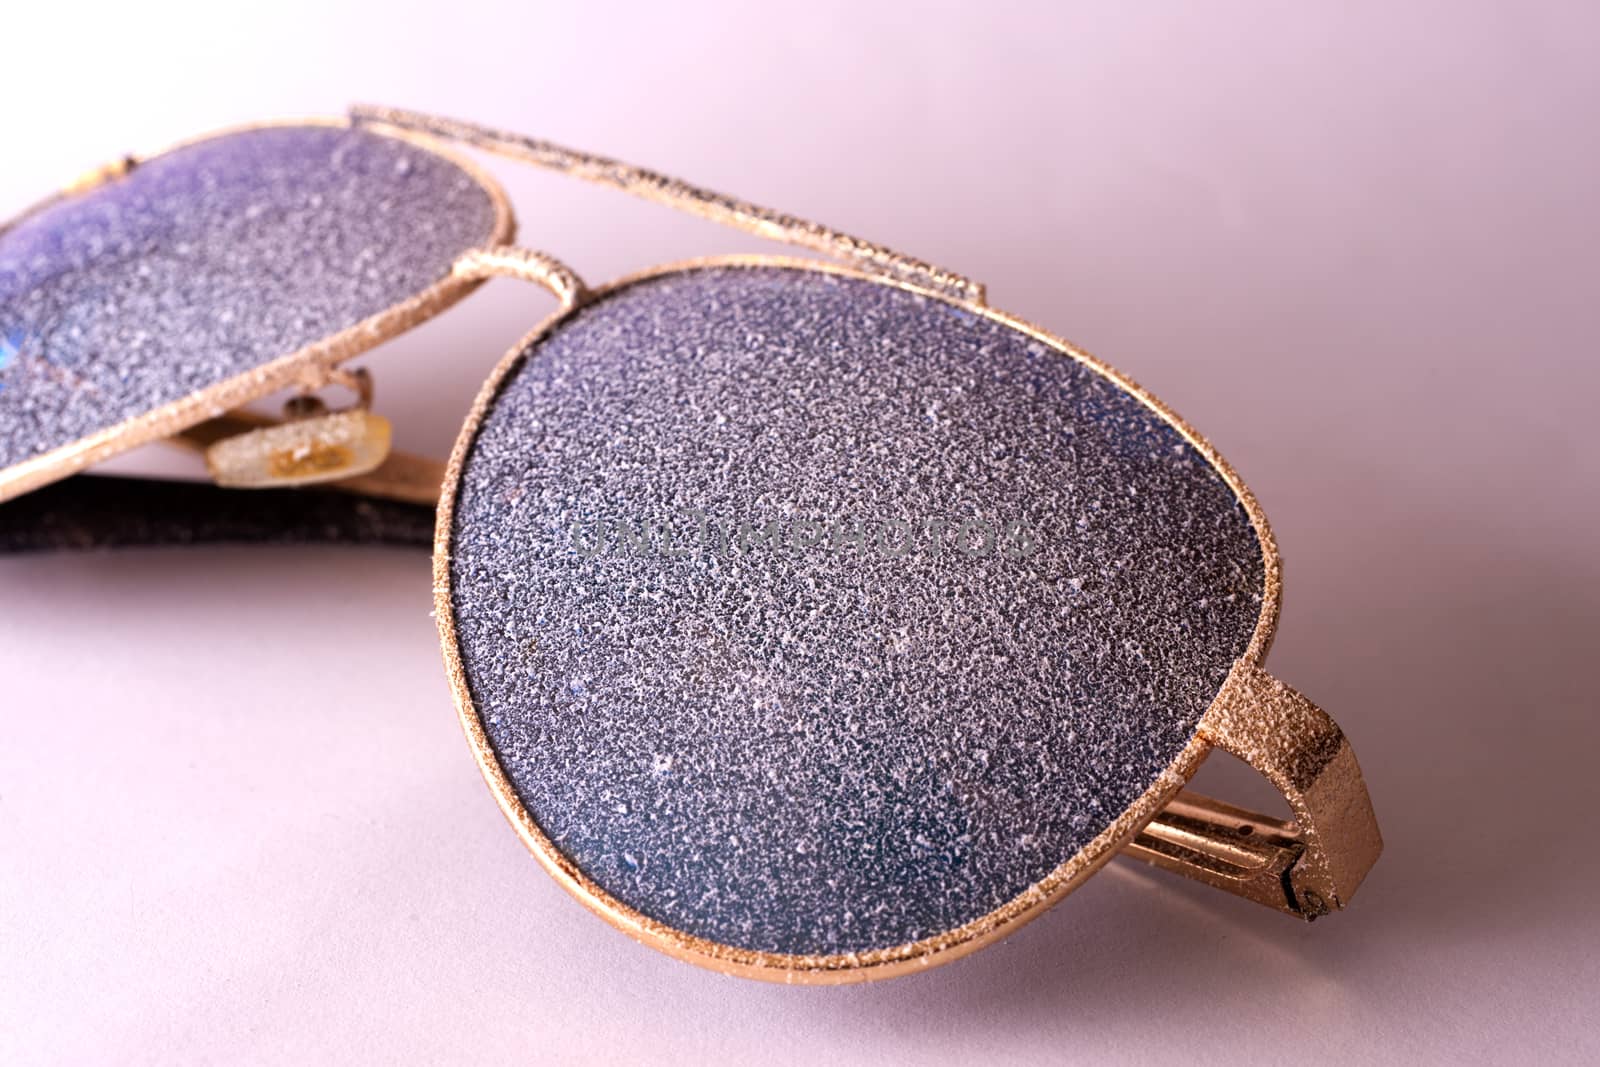 Sunglasses with artificial snow on white-purple background close-up view.